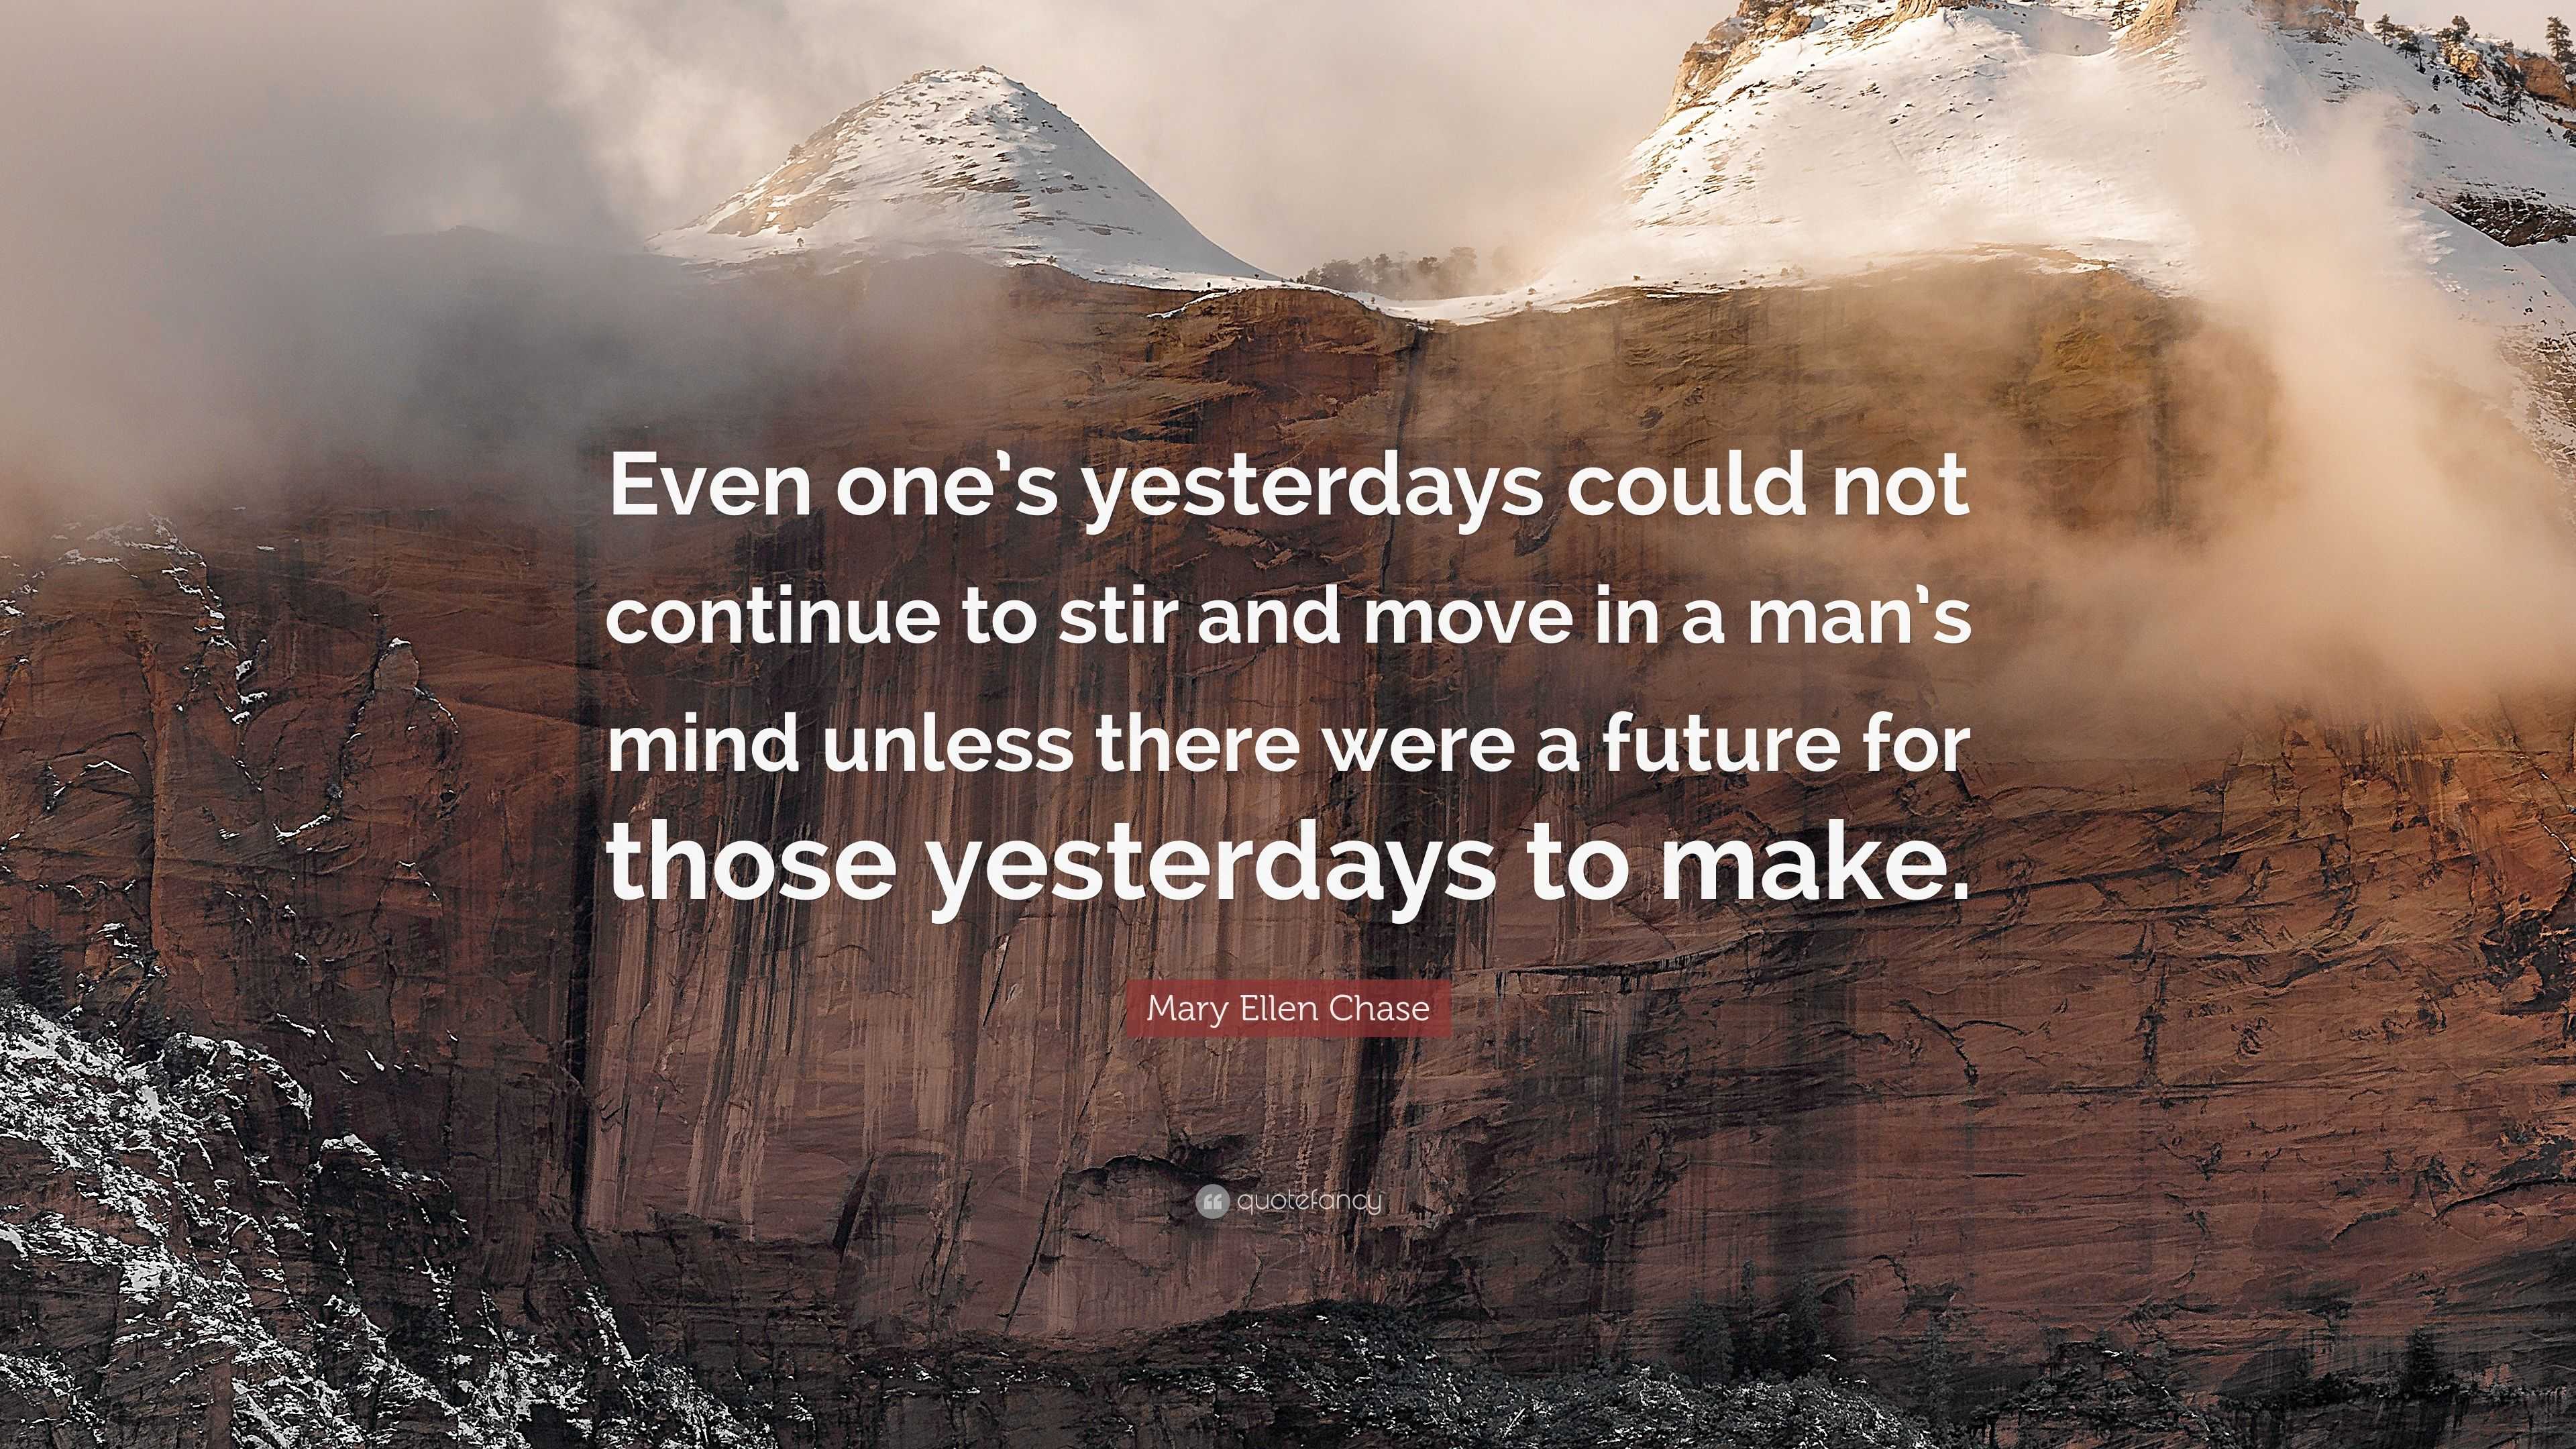 Mary Ellen Chase Quote: “Even one’s yesterdays could not continue to ...